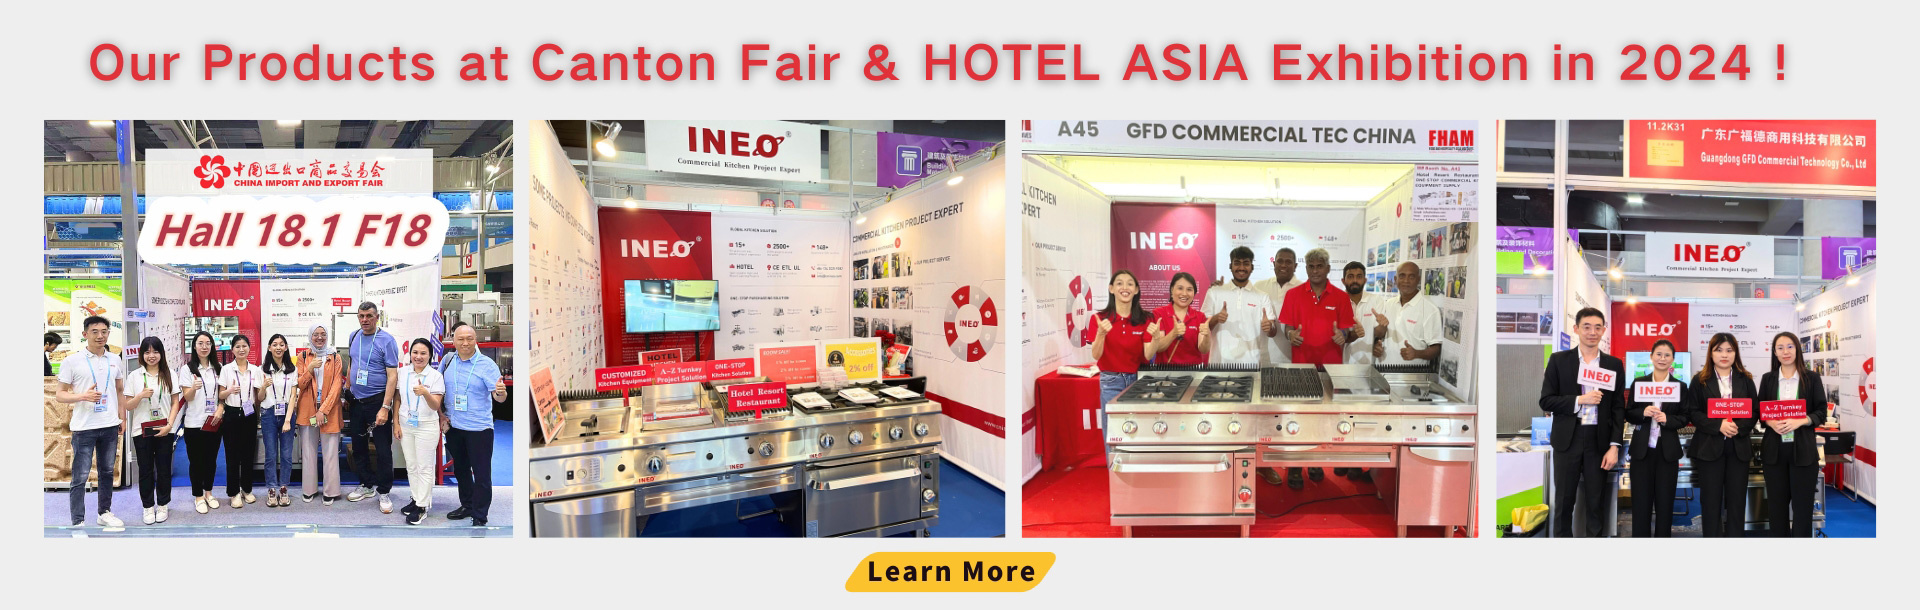 Our Company's Participation in the 135th Canton Fair